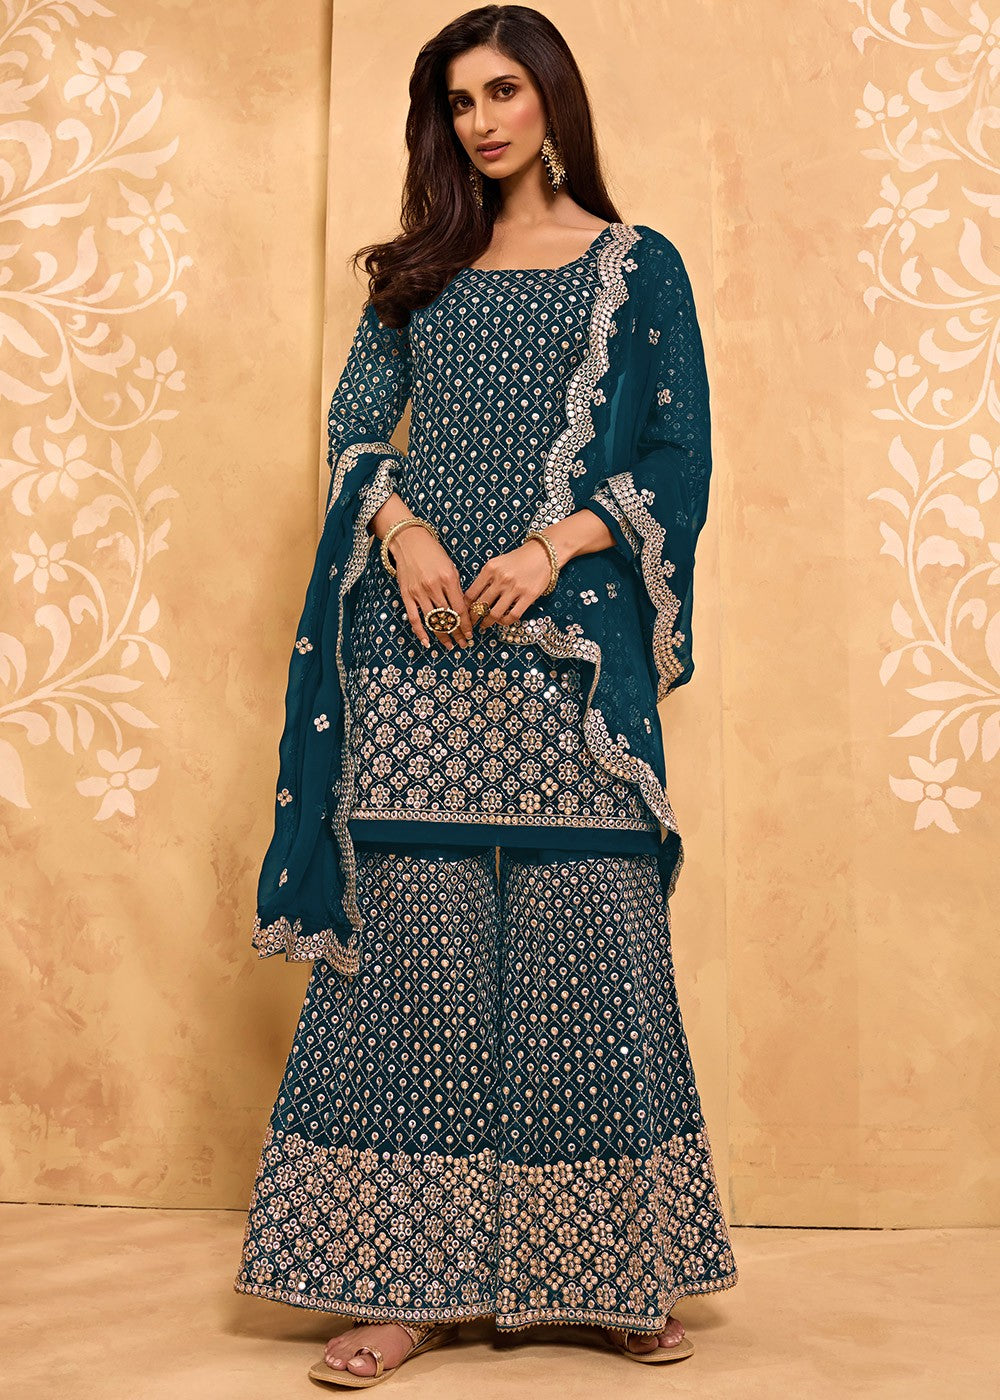 Mesmerizing Peacock Blue Faux Georgette Embroidery & Stone Work Sharara Suit